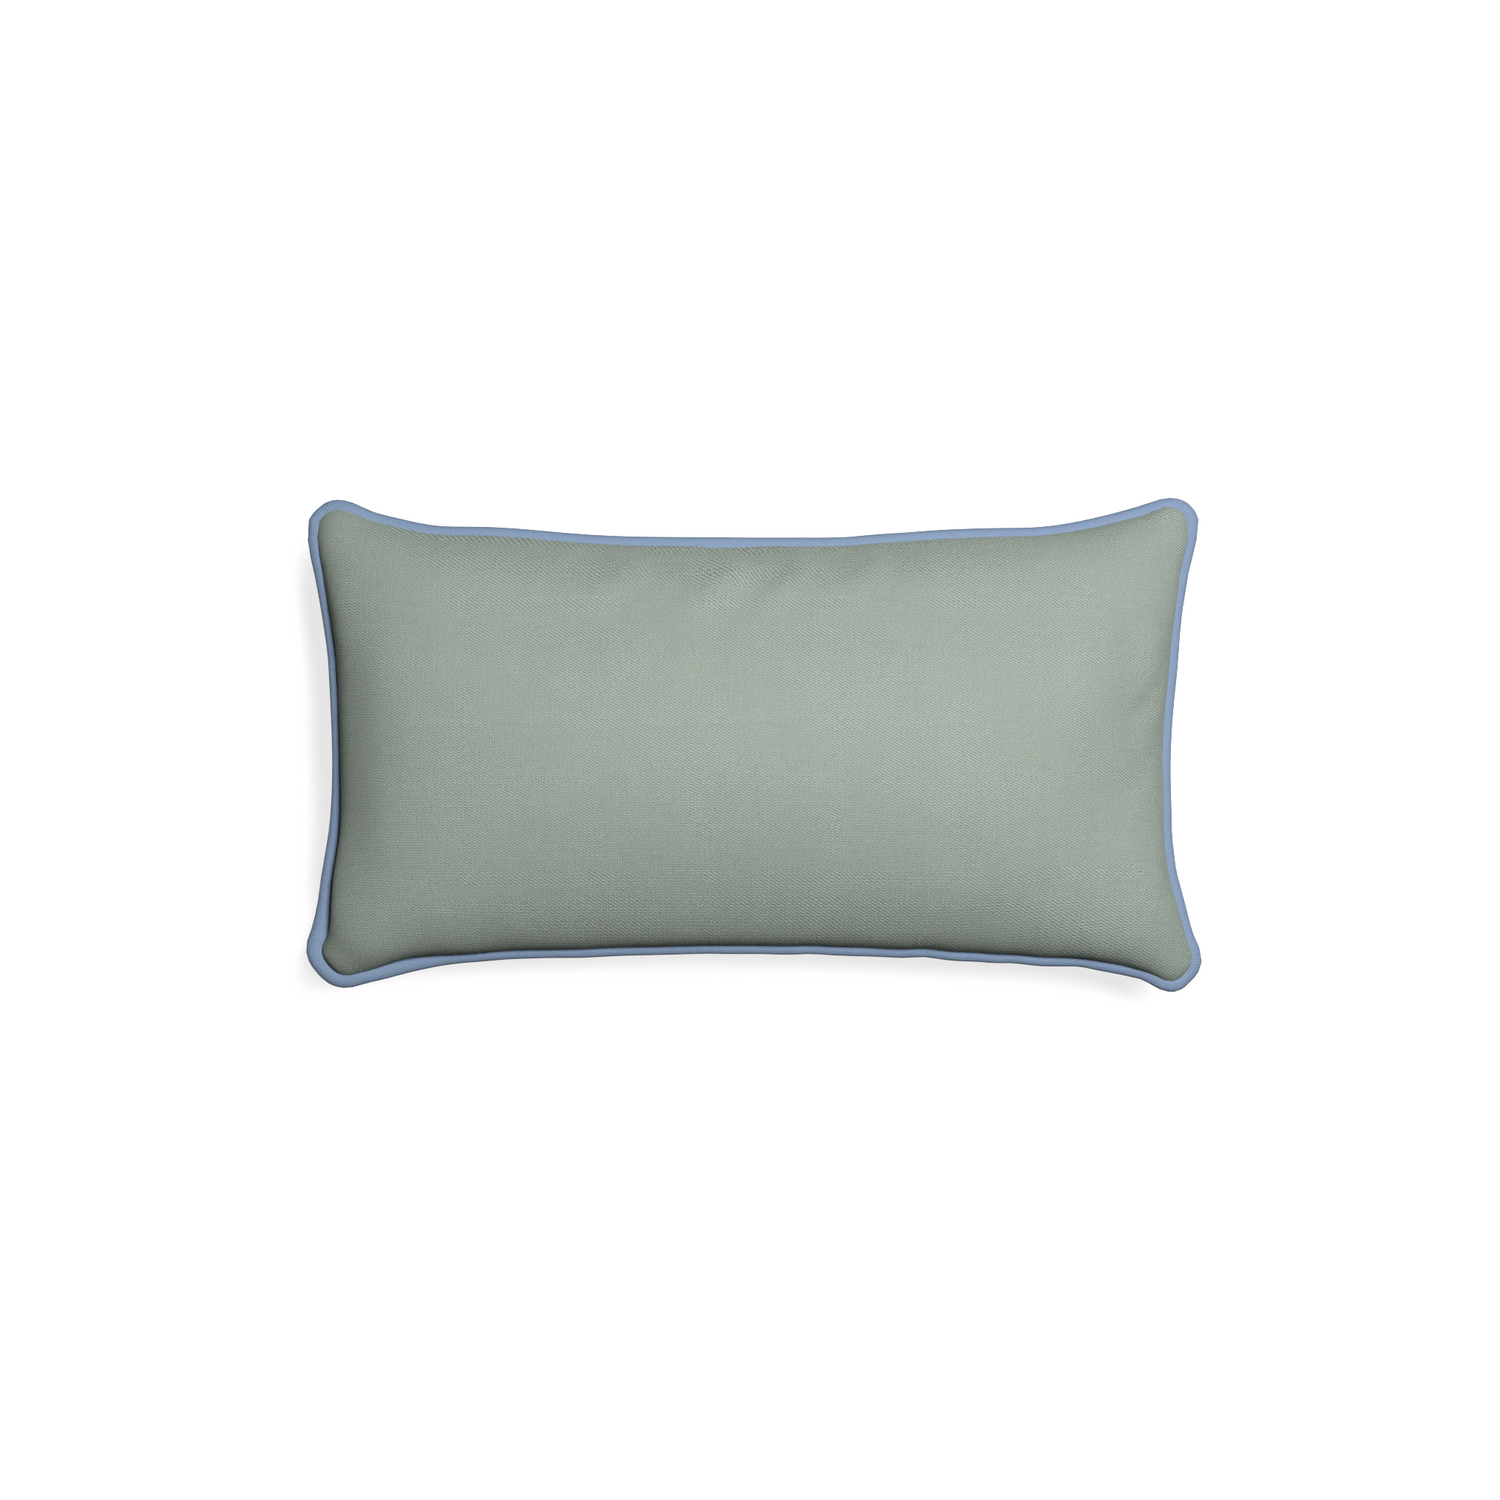 Petite-lumbar sage custom sage green cottonpillow with sky piping on white background